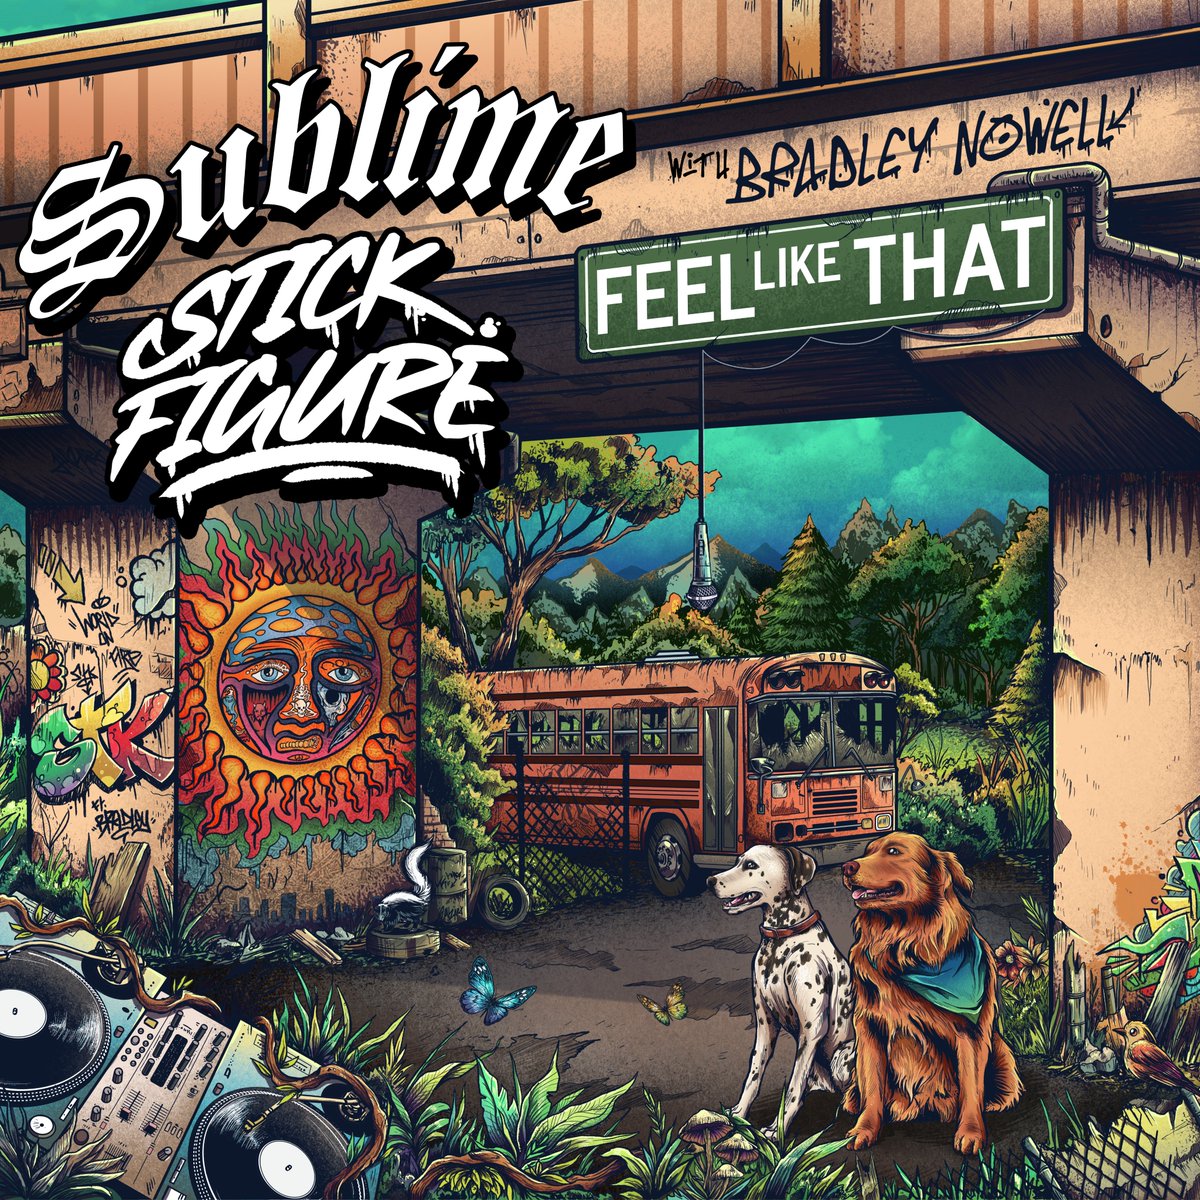 “Feel Like That (ft. Bradley Nowell)” available worldwide May 24th! ☀️ 

Sublime and Stick Figure ft. original Bradley Nowell vocals alongside Eric Wilson, Bud Gaugh, Jakob Nowell and Stick Figure, in collaboration with Skunk Records. @sublime